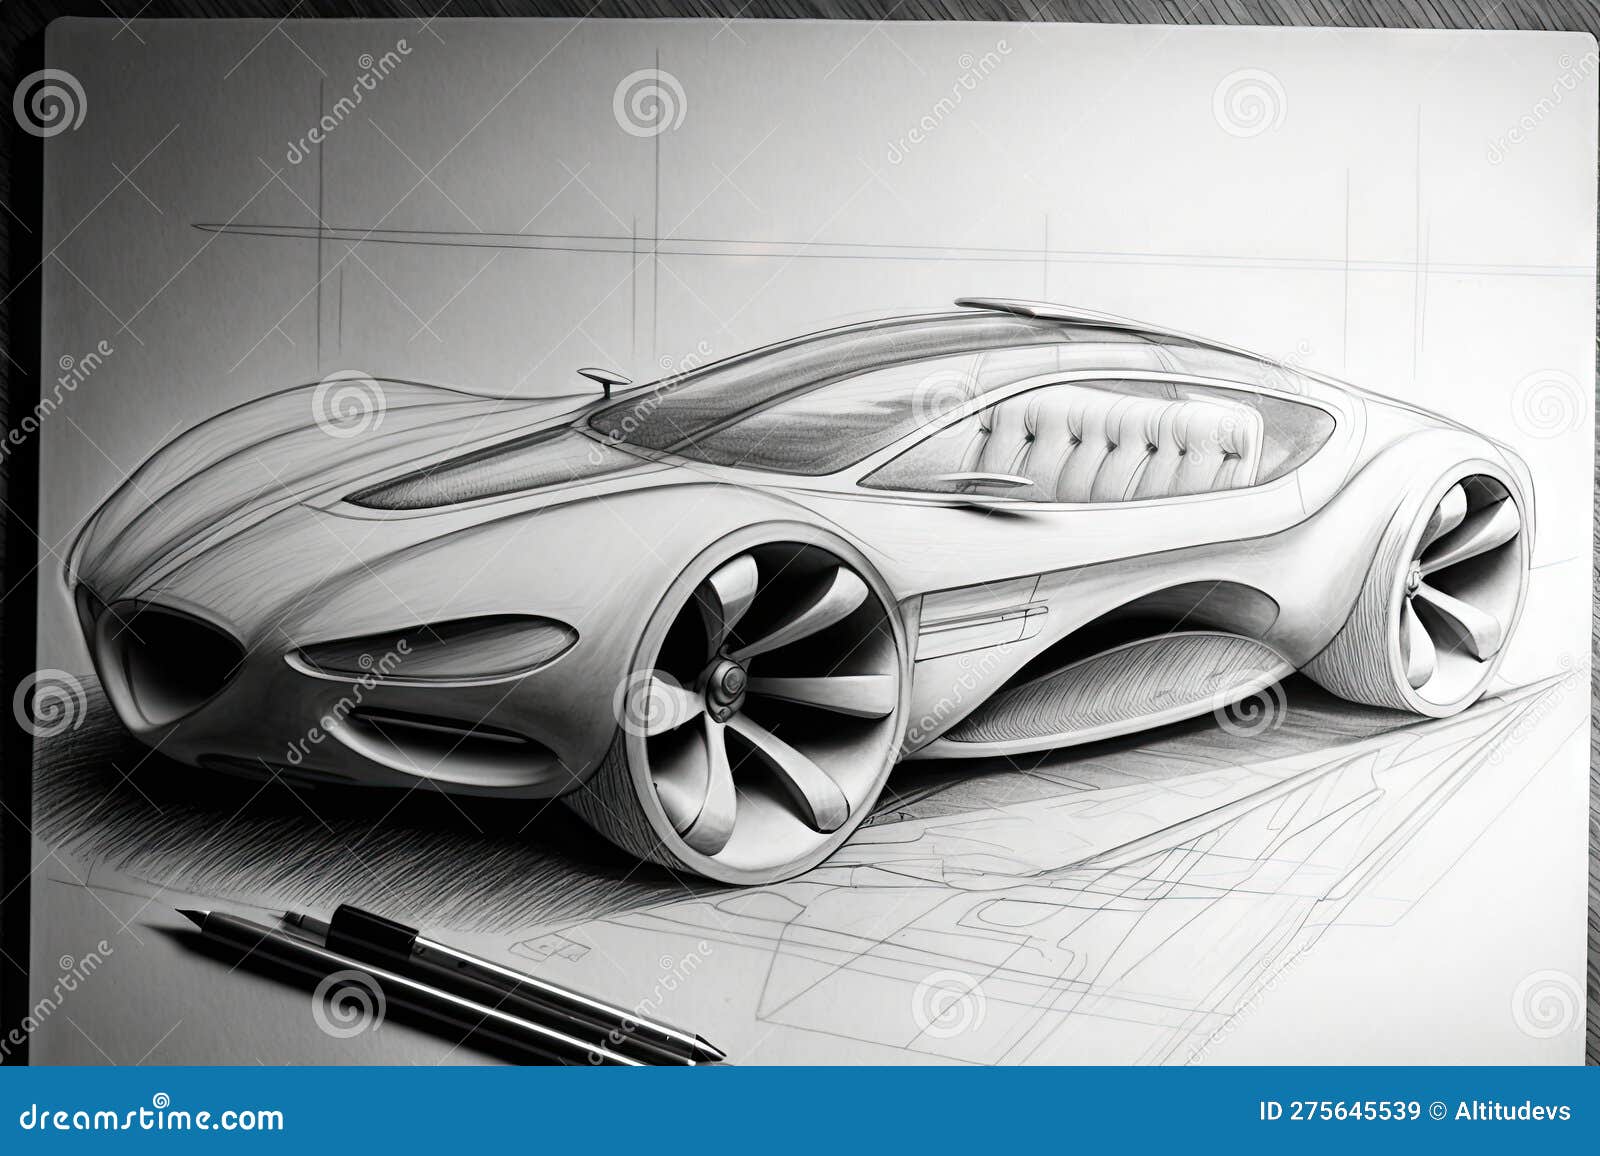 Design of an Idea in the Automotive Industry. Editorial Image -  Illustration of space, phone: 260410540